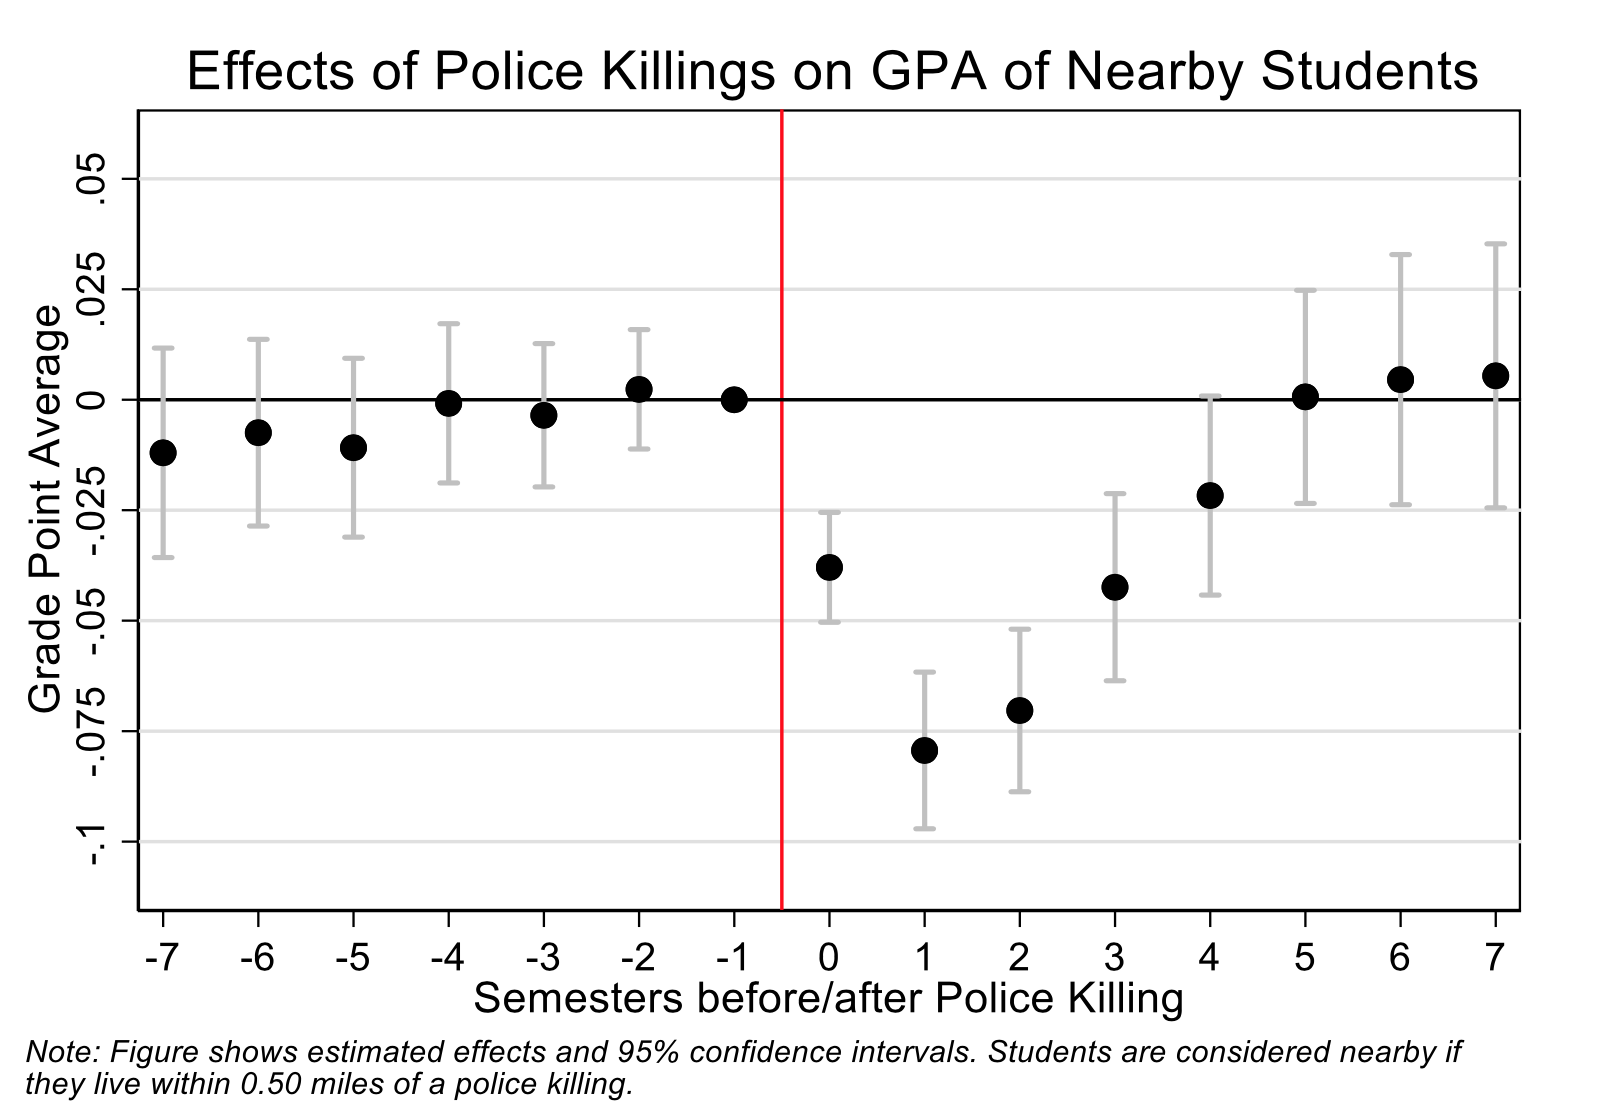 Figure: Effects of Police Killings on GPA of Nearby Students